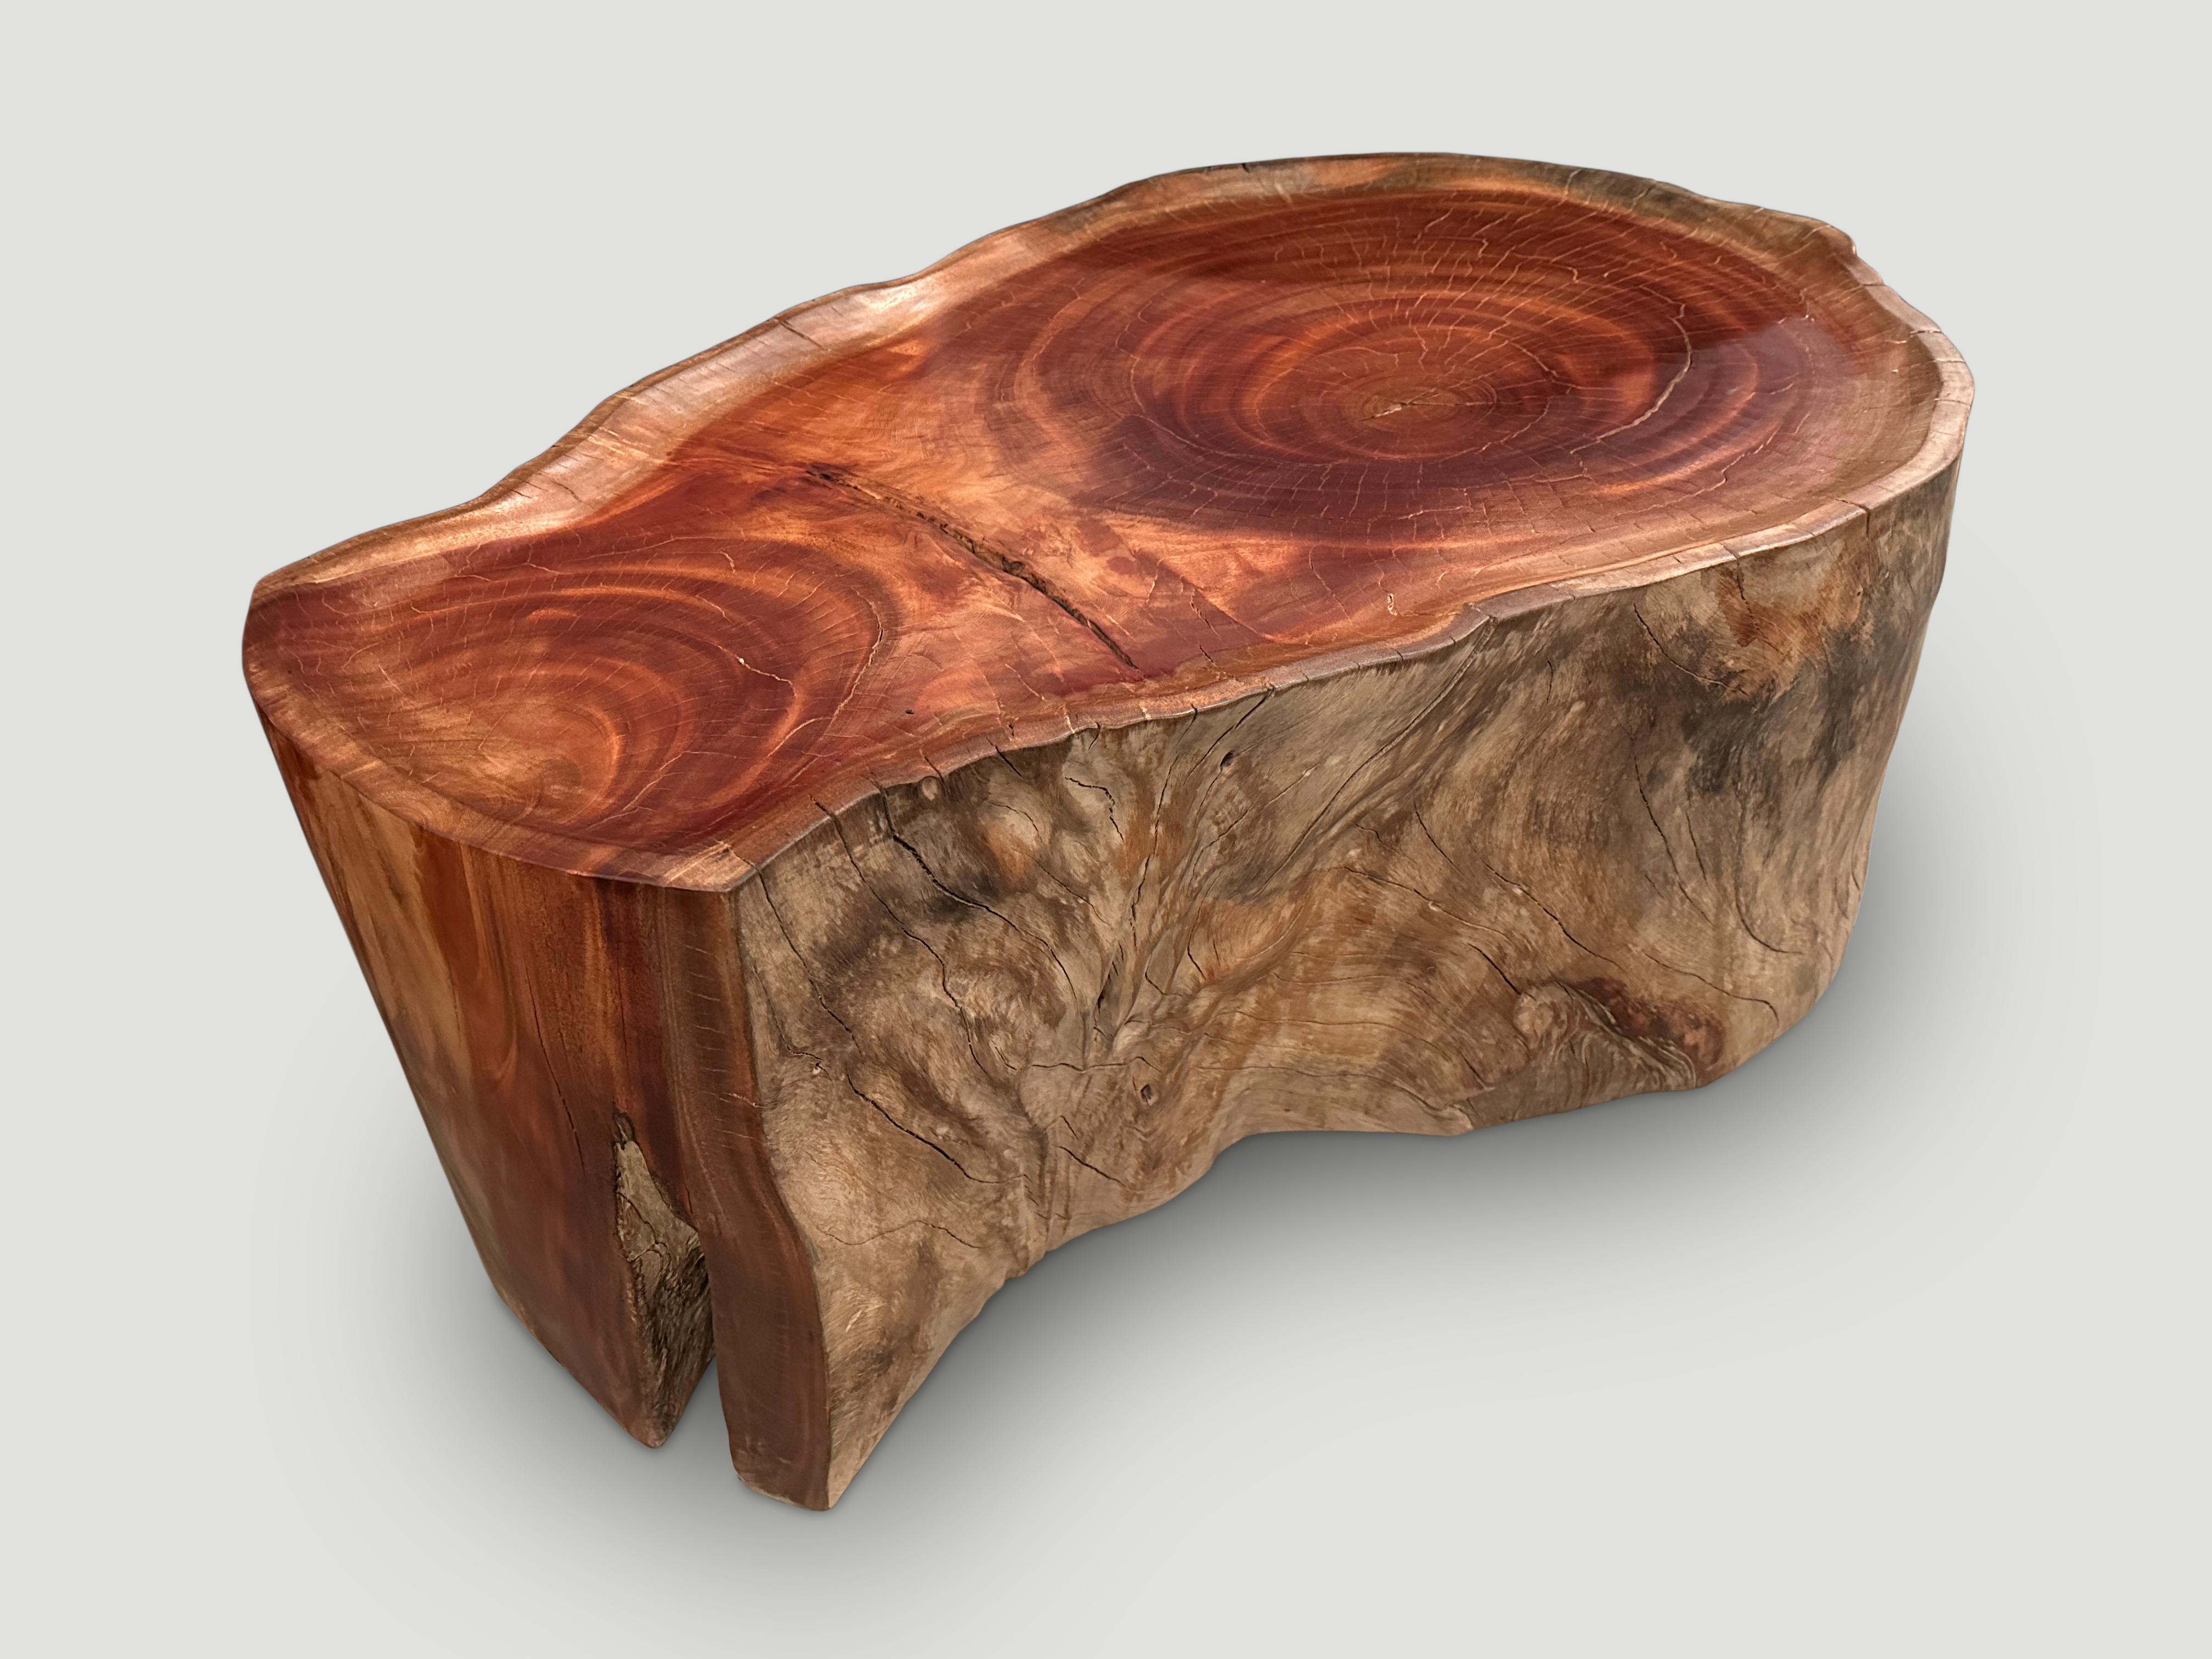 Impressive mahogany wood coffee table hand carved into this usable shape whilst respecting the organic wood. We hand carved the top section into a tray style and polished the aged wood with a natural oil revealing the beautiful wood grain. The sides